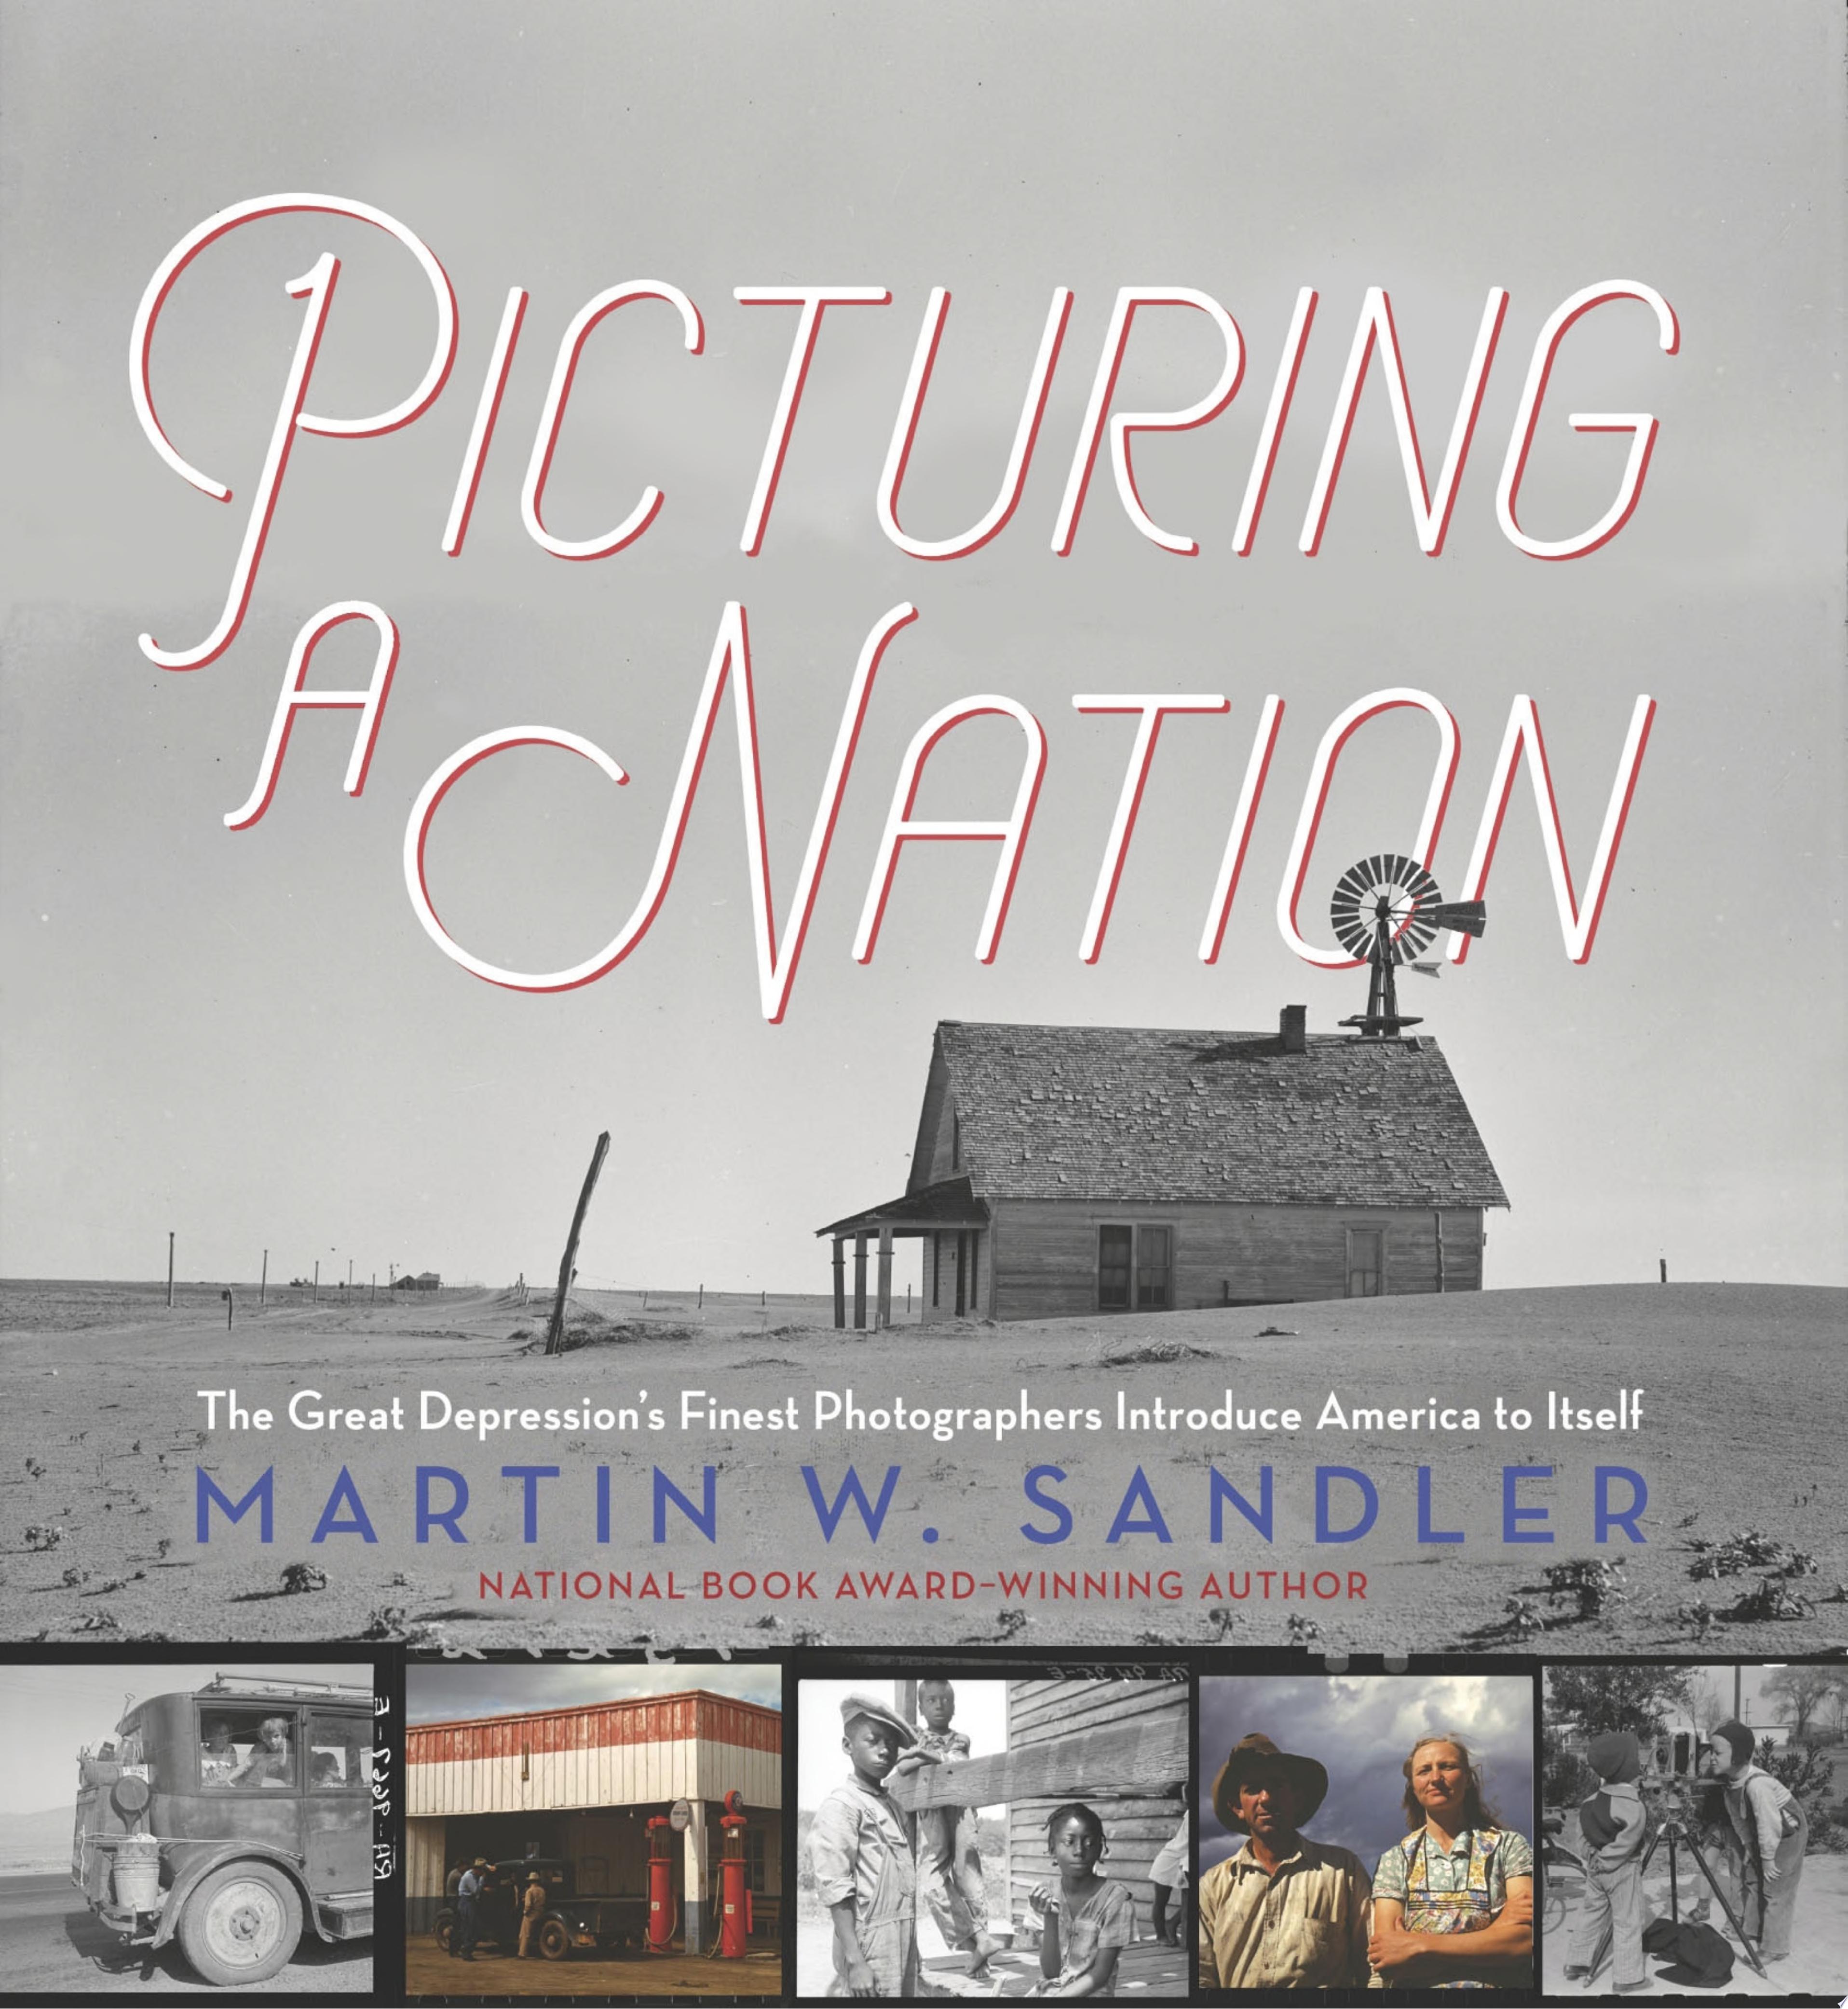 Image for "Picturing a Nation: The Great Depression’s Finest Photographers Introduce America to Itself"